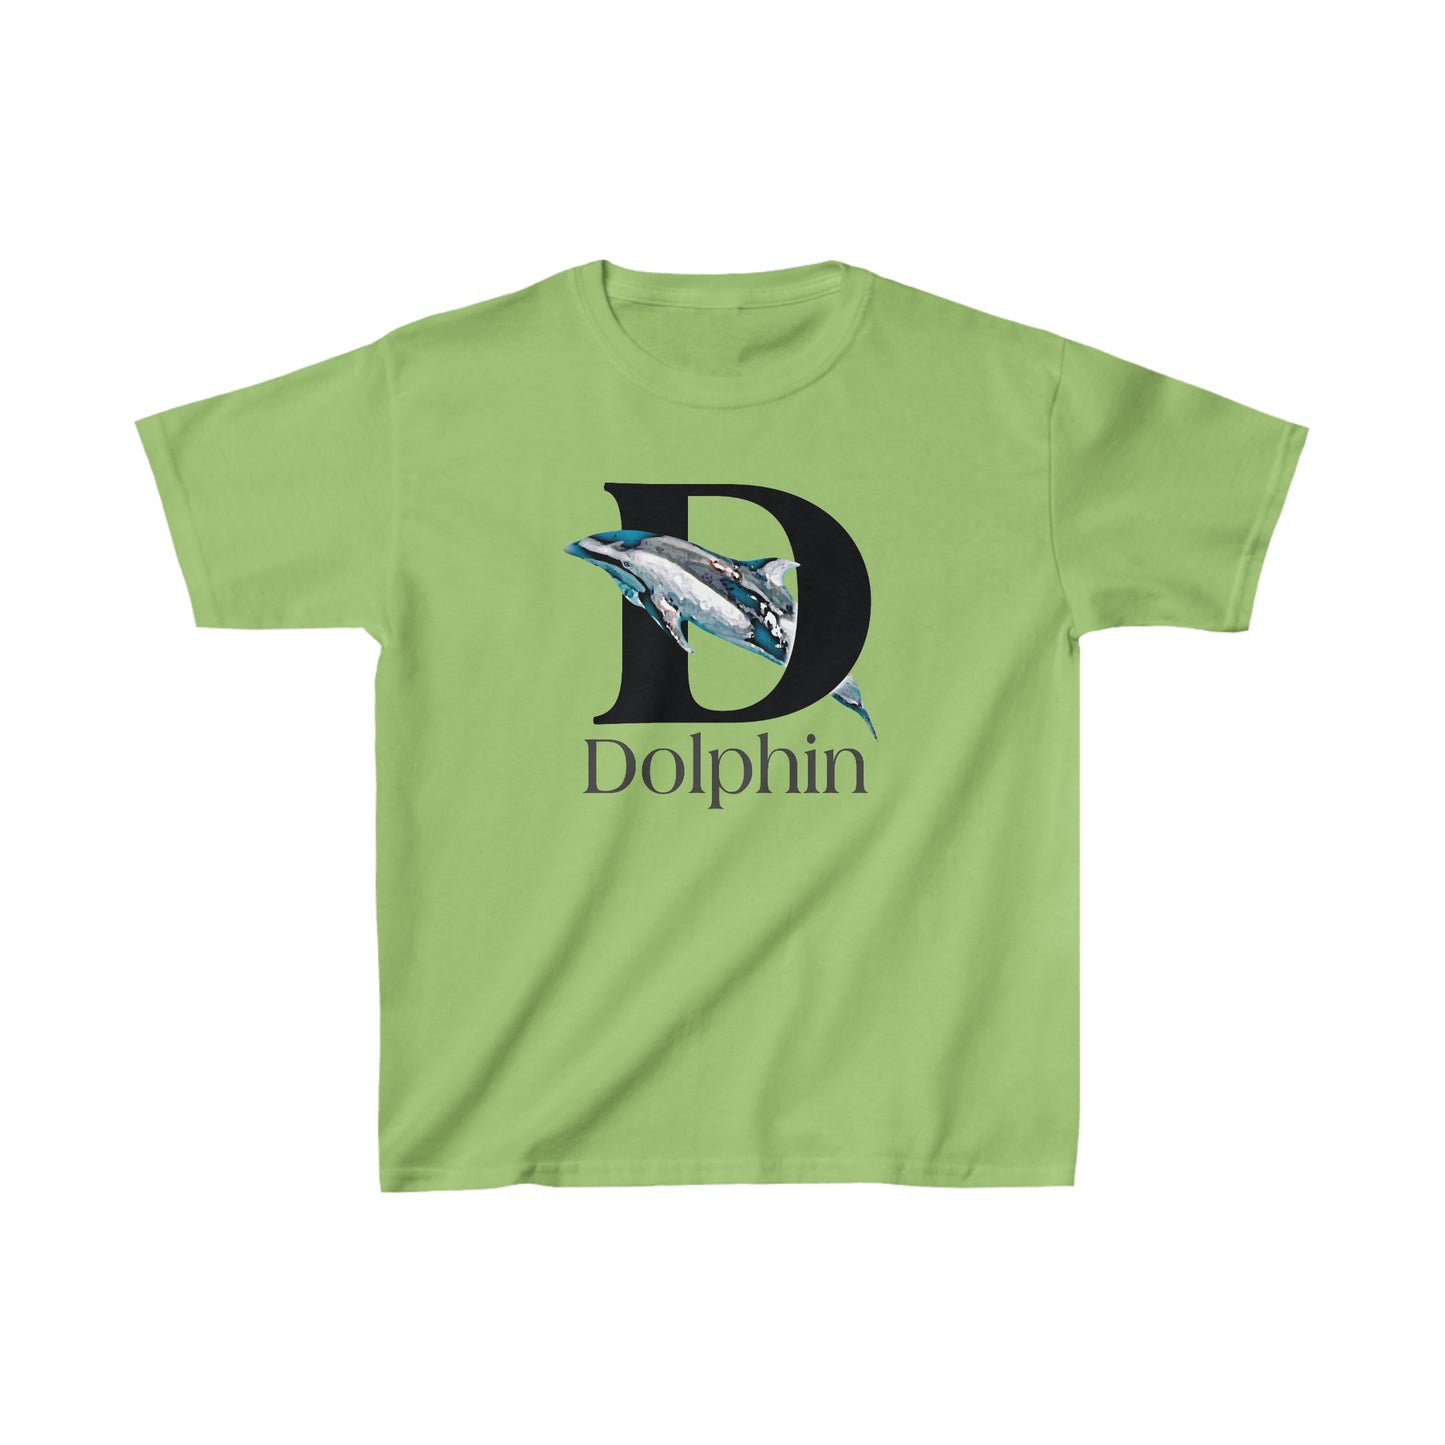 D is for Dolphin Kid's T-Shirt, Dolphin Drawing T-Shirt, Dolphin Lovers shirt, Dolphin illustration, animal t-shirt, animal alphabet T